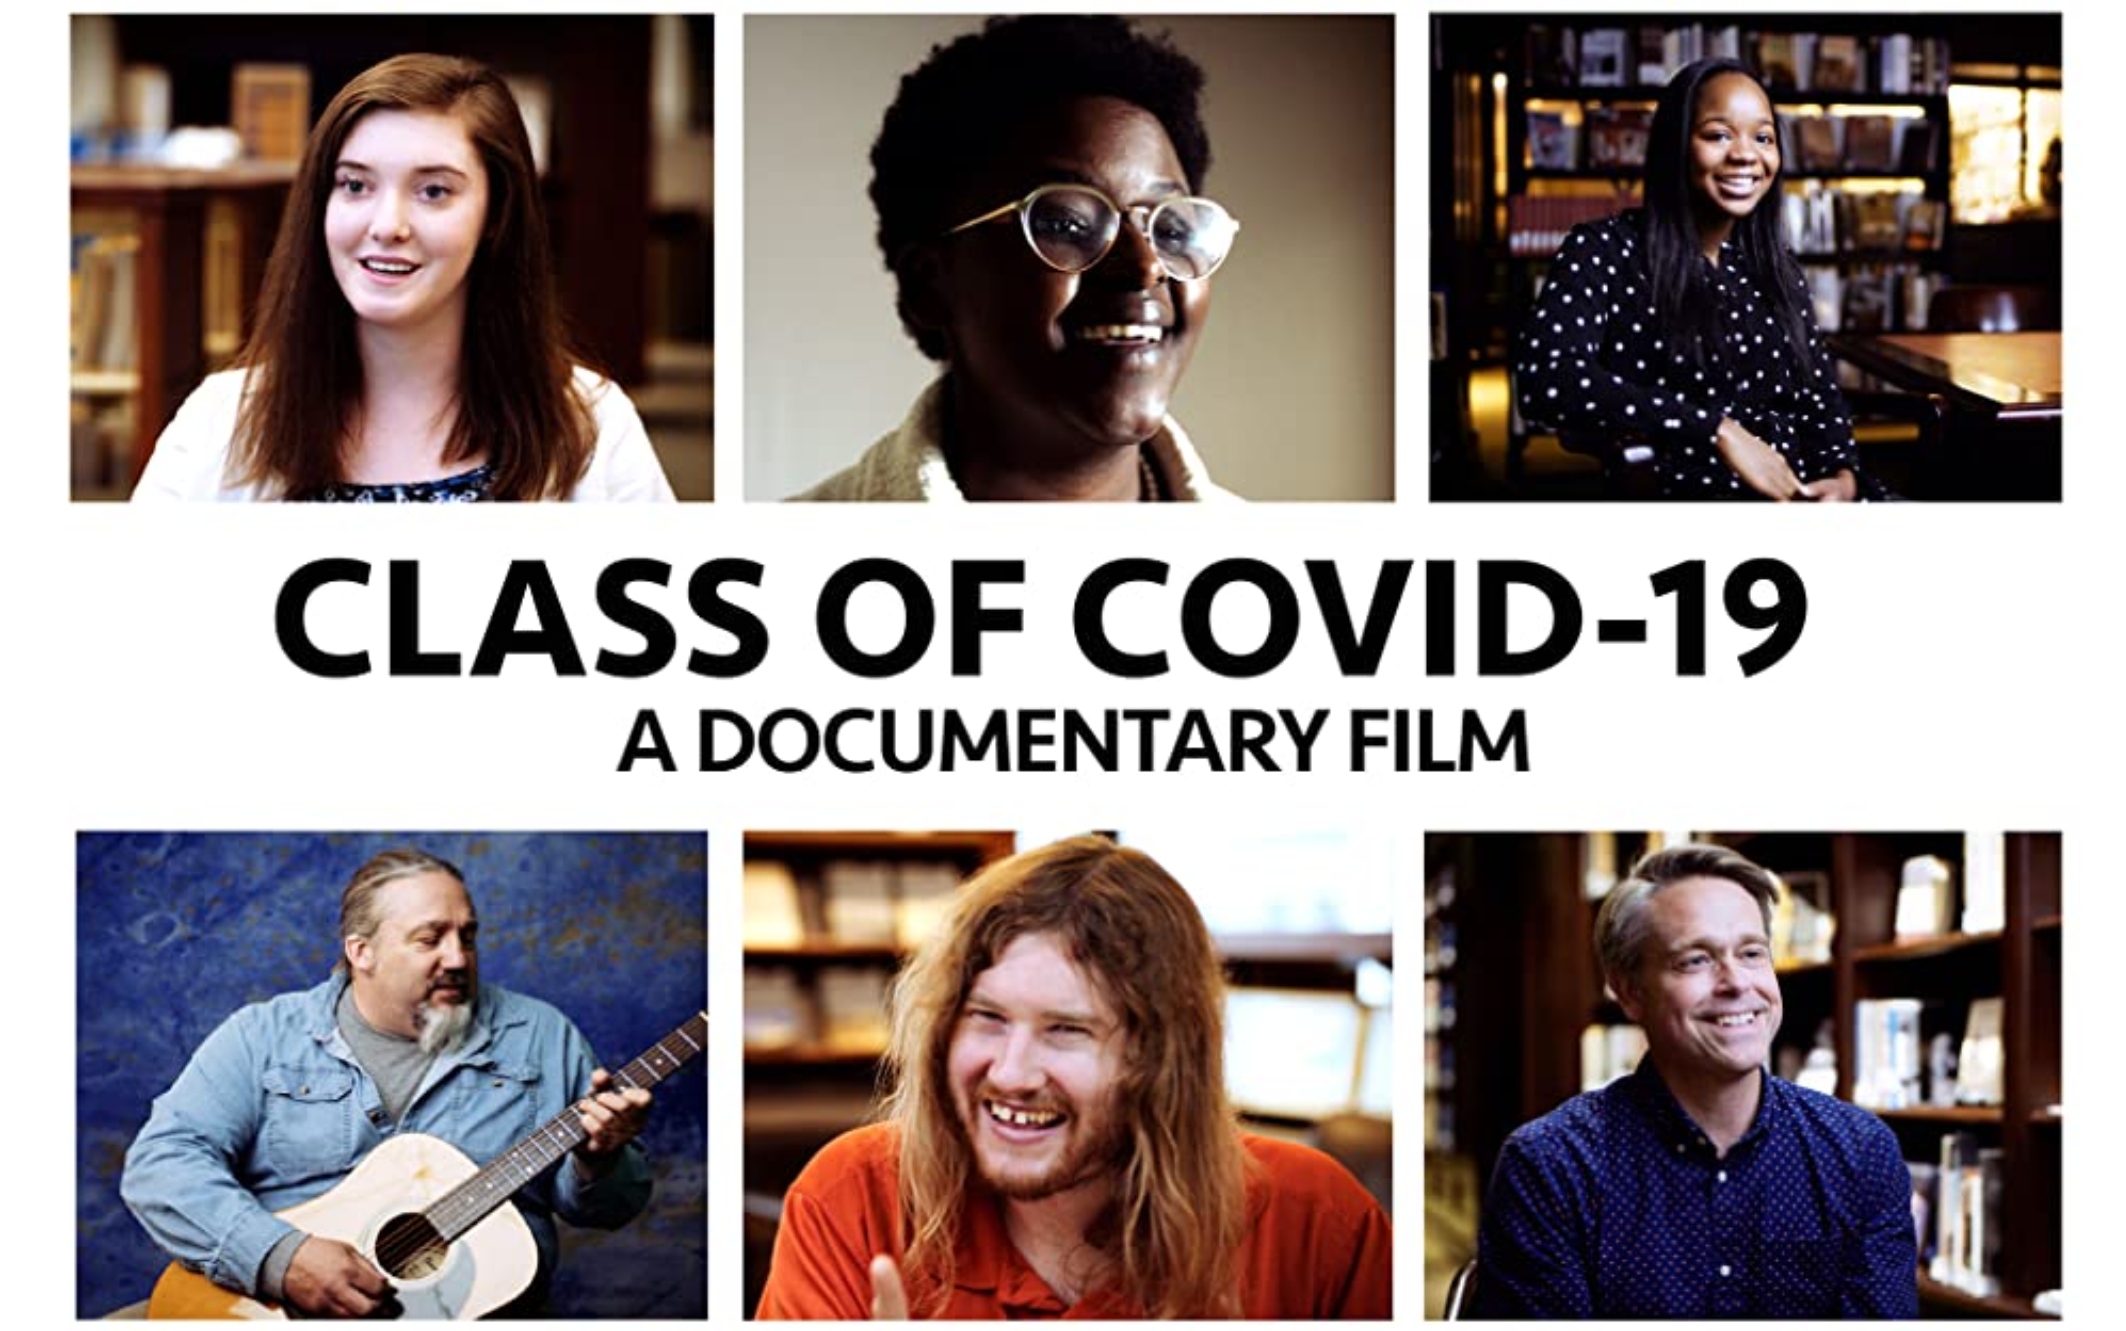 A title screen from the film shows six photos of people in the film with the title, "Class of COVID-19 a documentary film"